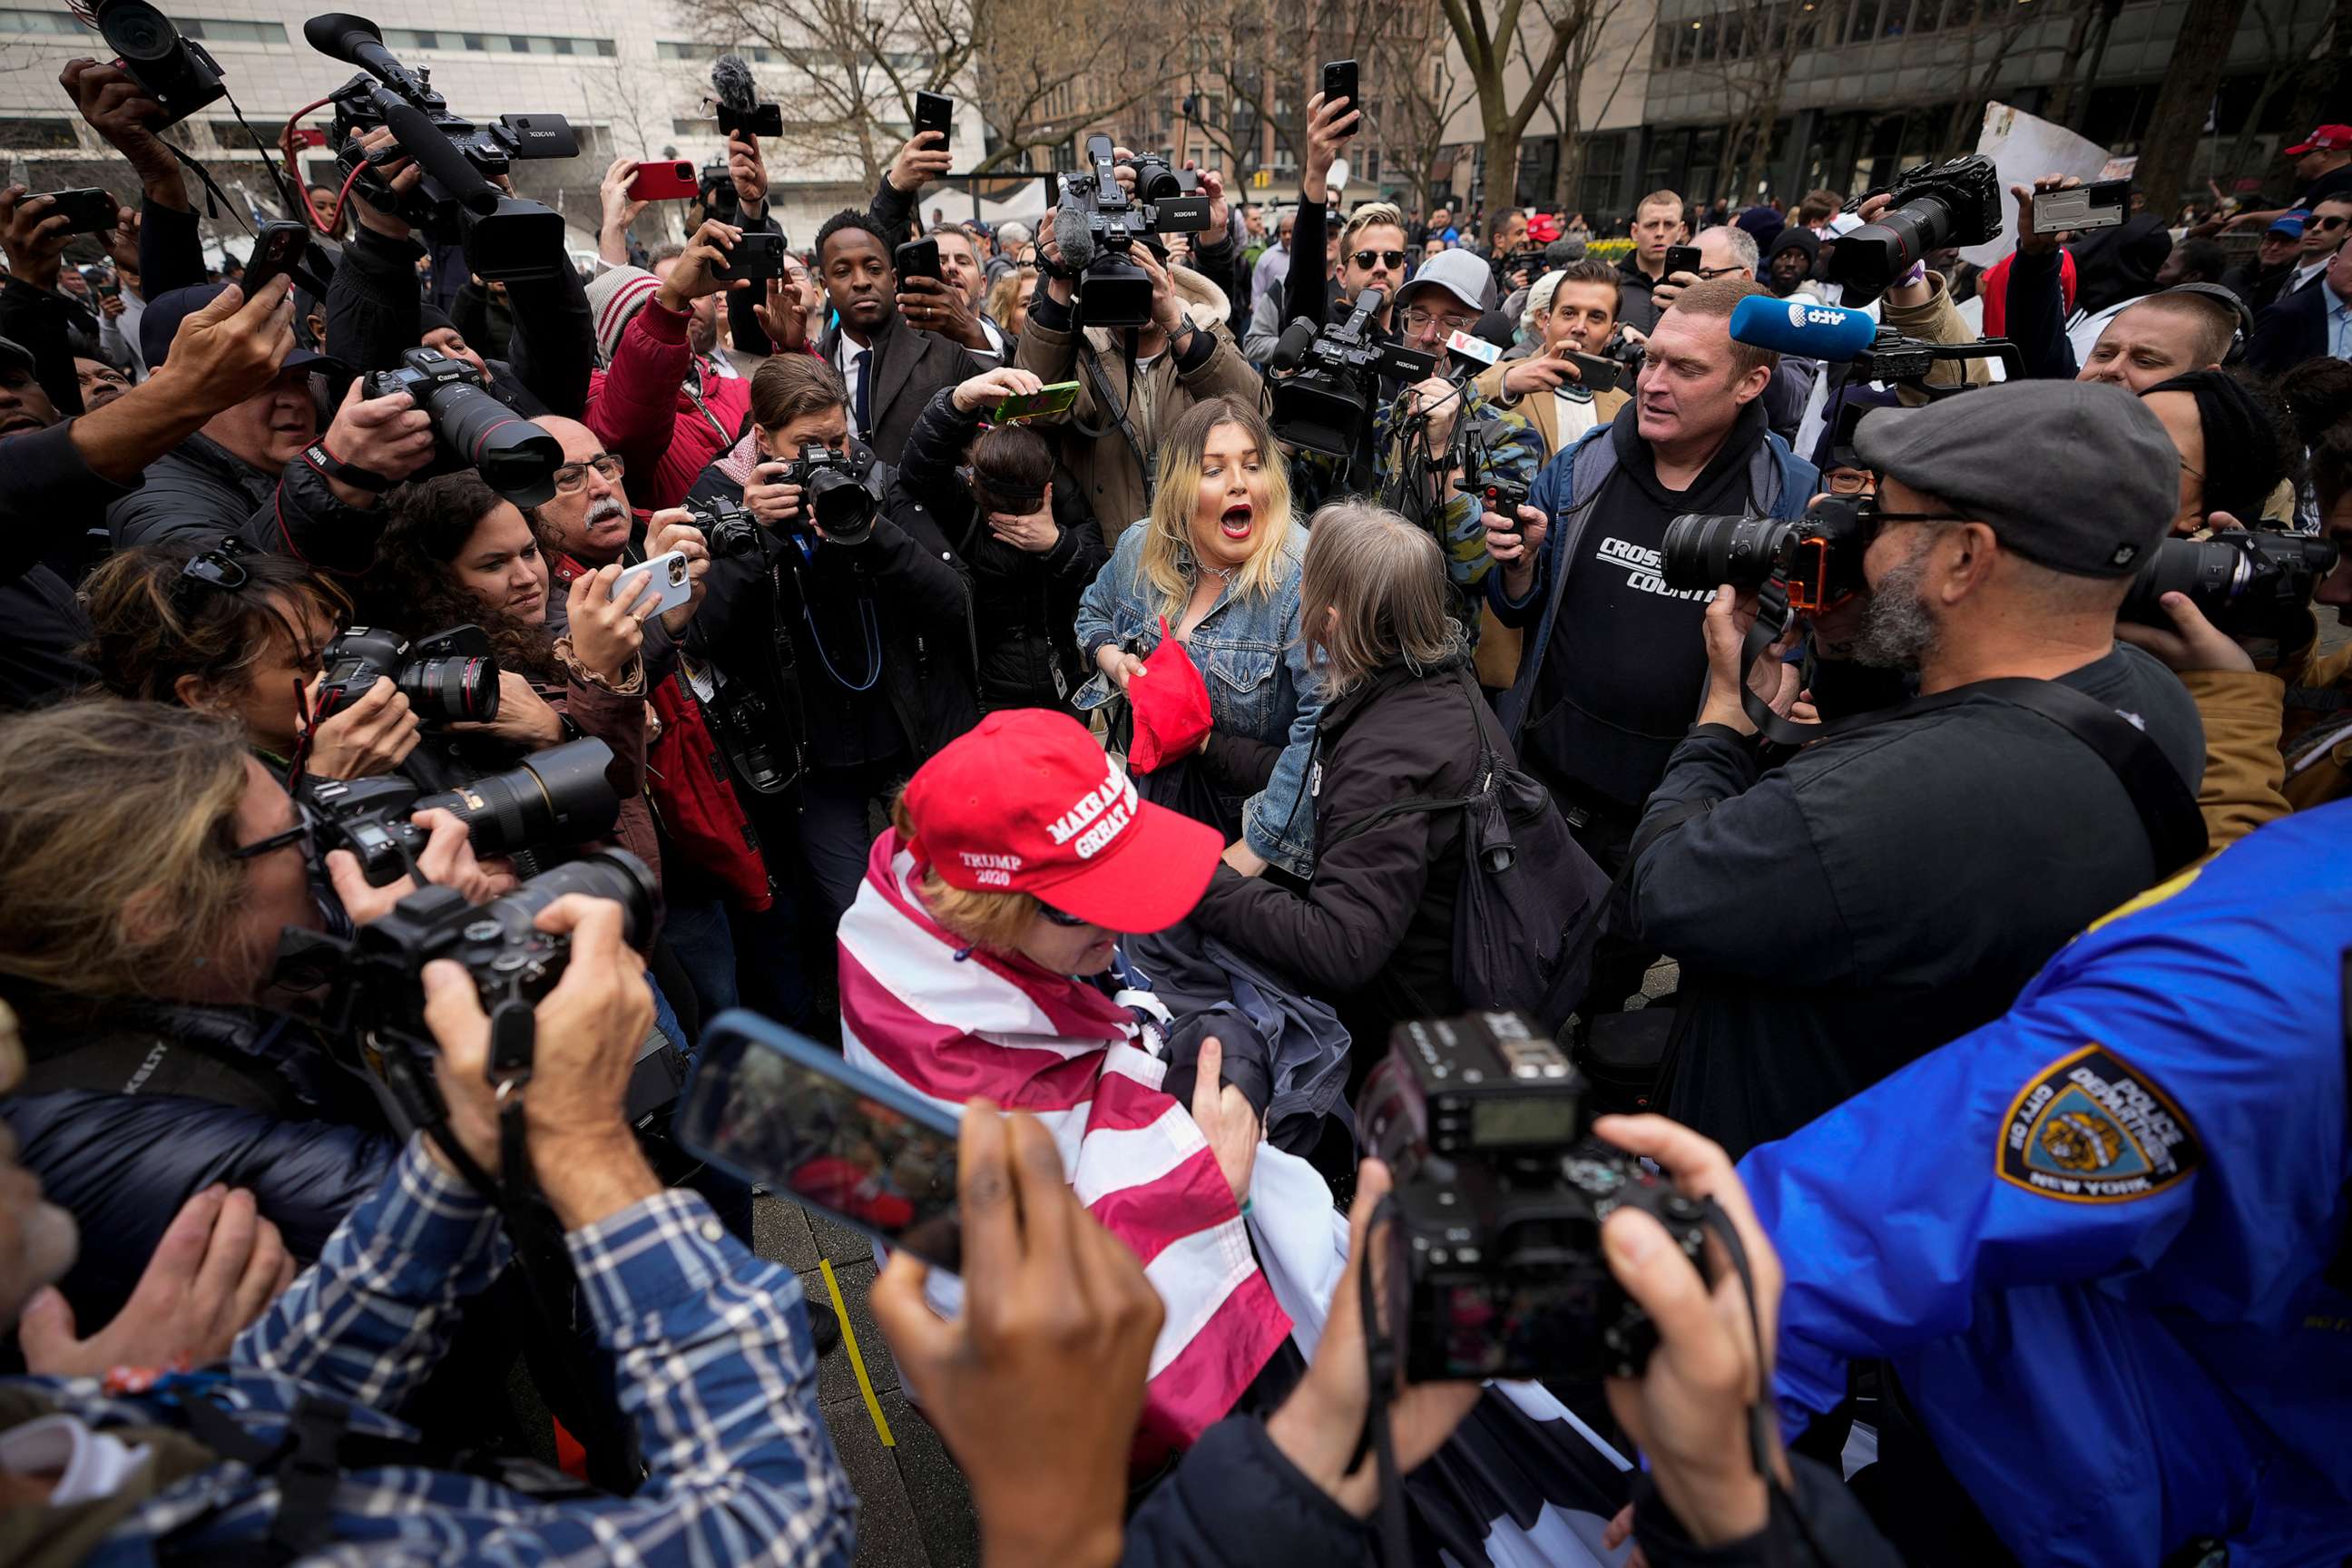 PHOTO: A supporter of former President Donald Trump scuffles with anti-Trump protesters outside the courthouse where Trump will arrive later in the day for his arraignment on April 4, 2023 in New York City.